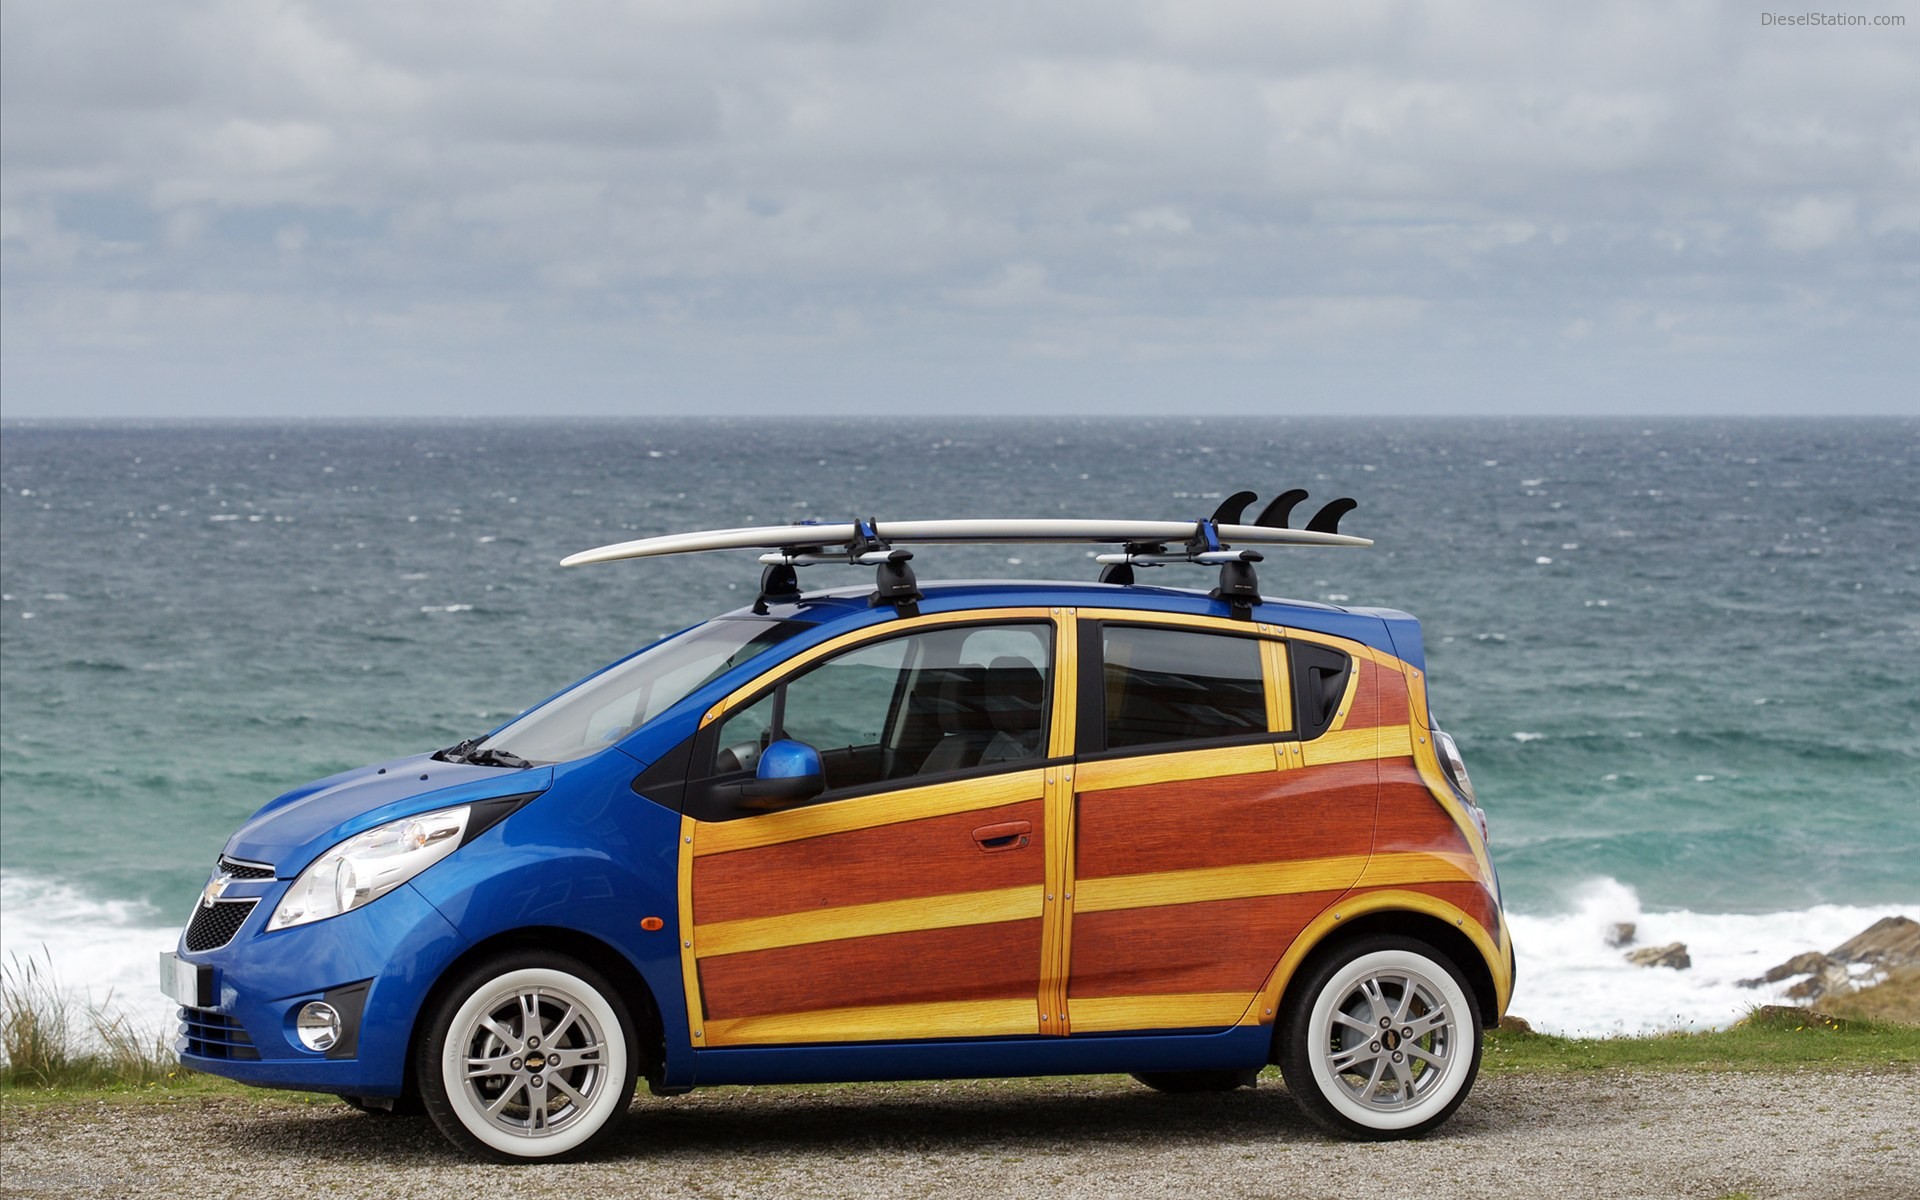 Chevrolet Spark Woody Wagon - Chevrolet Spark With Surfboard , HD Wallpaper & Backgrounds